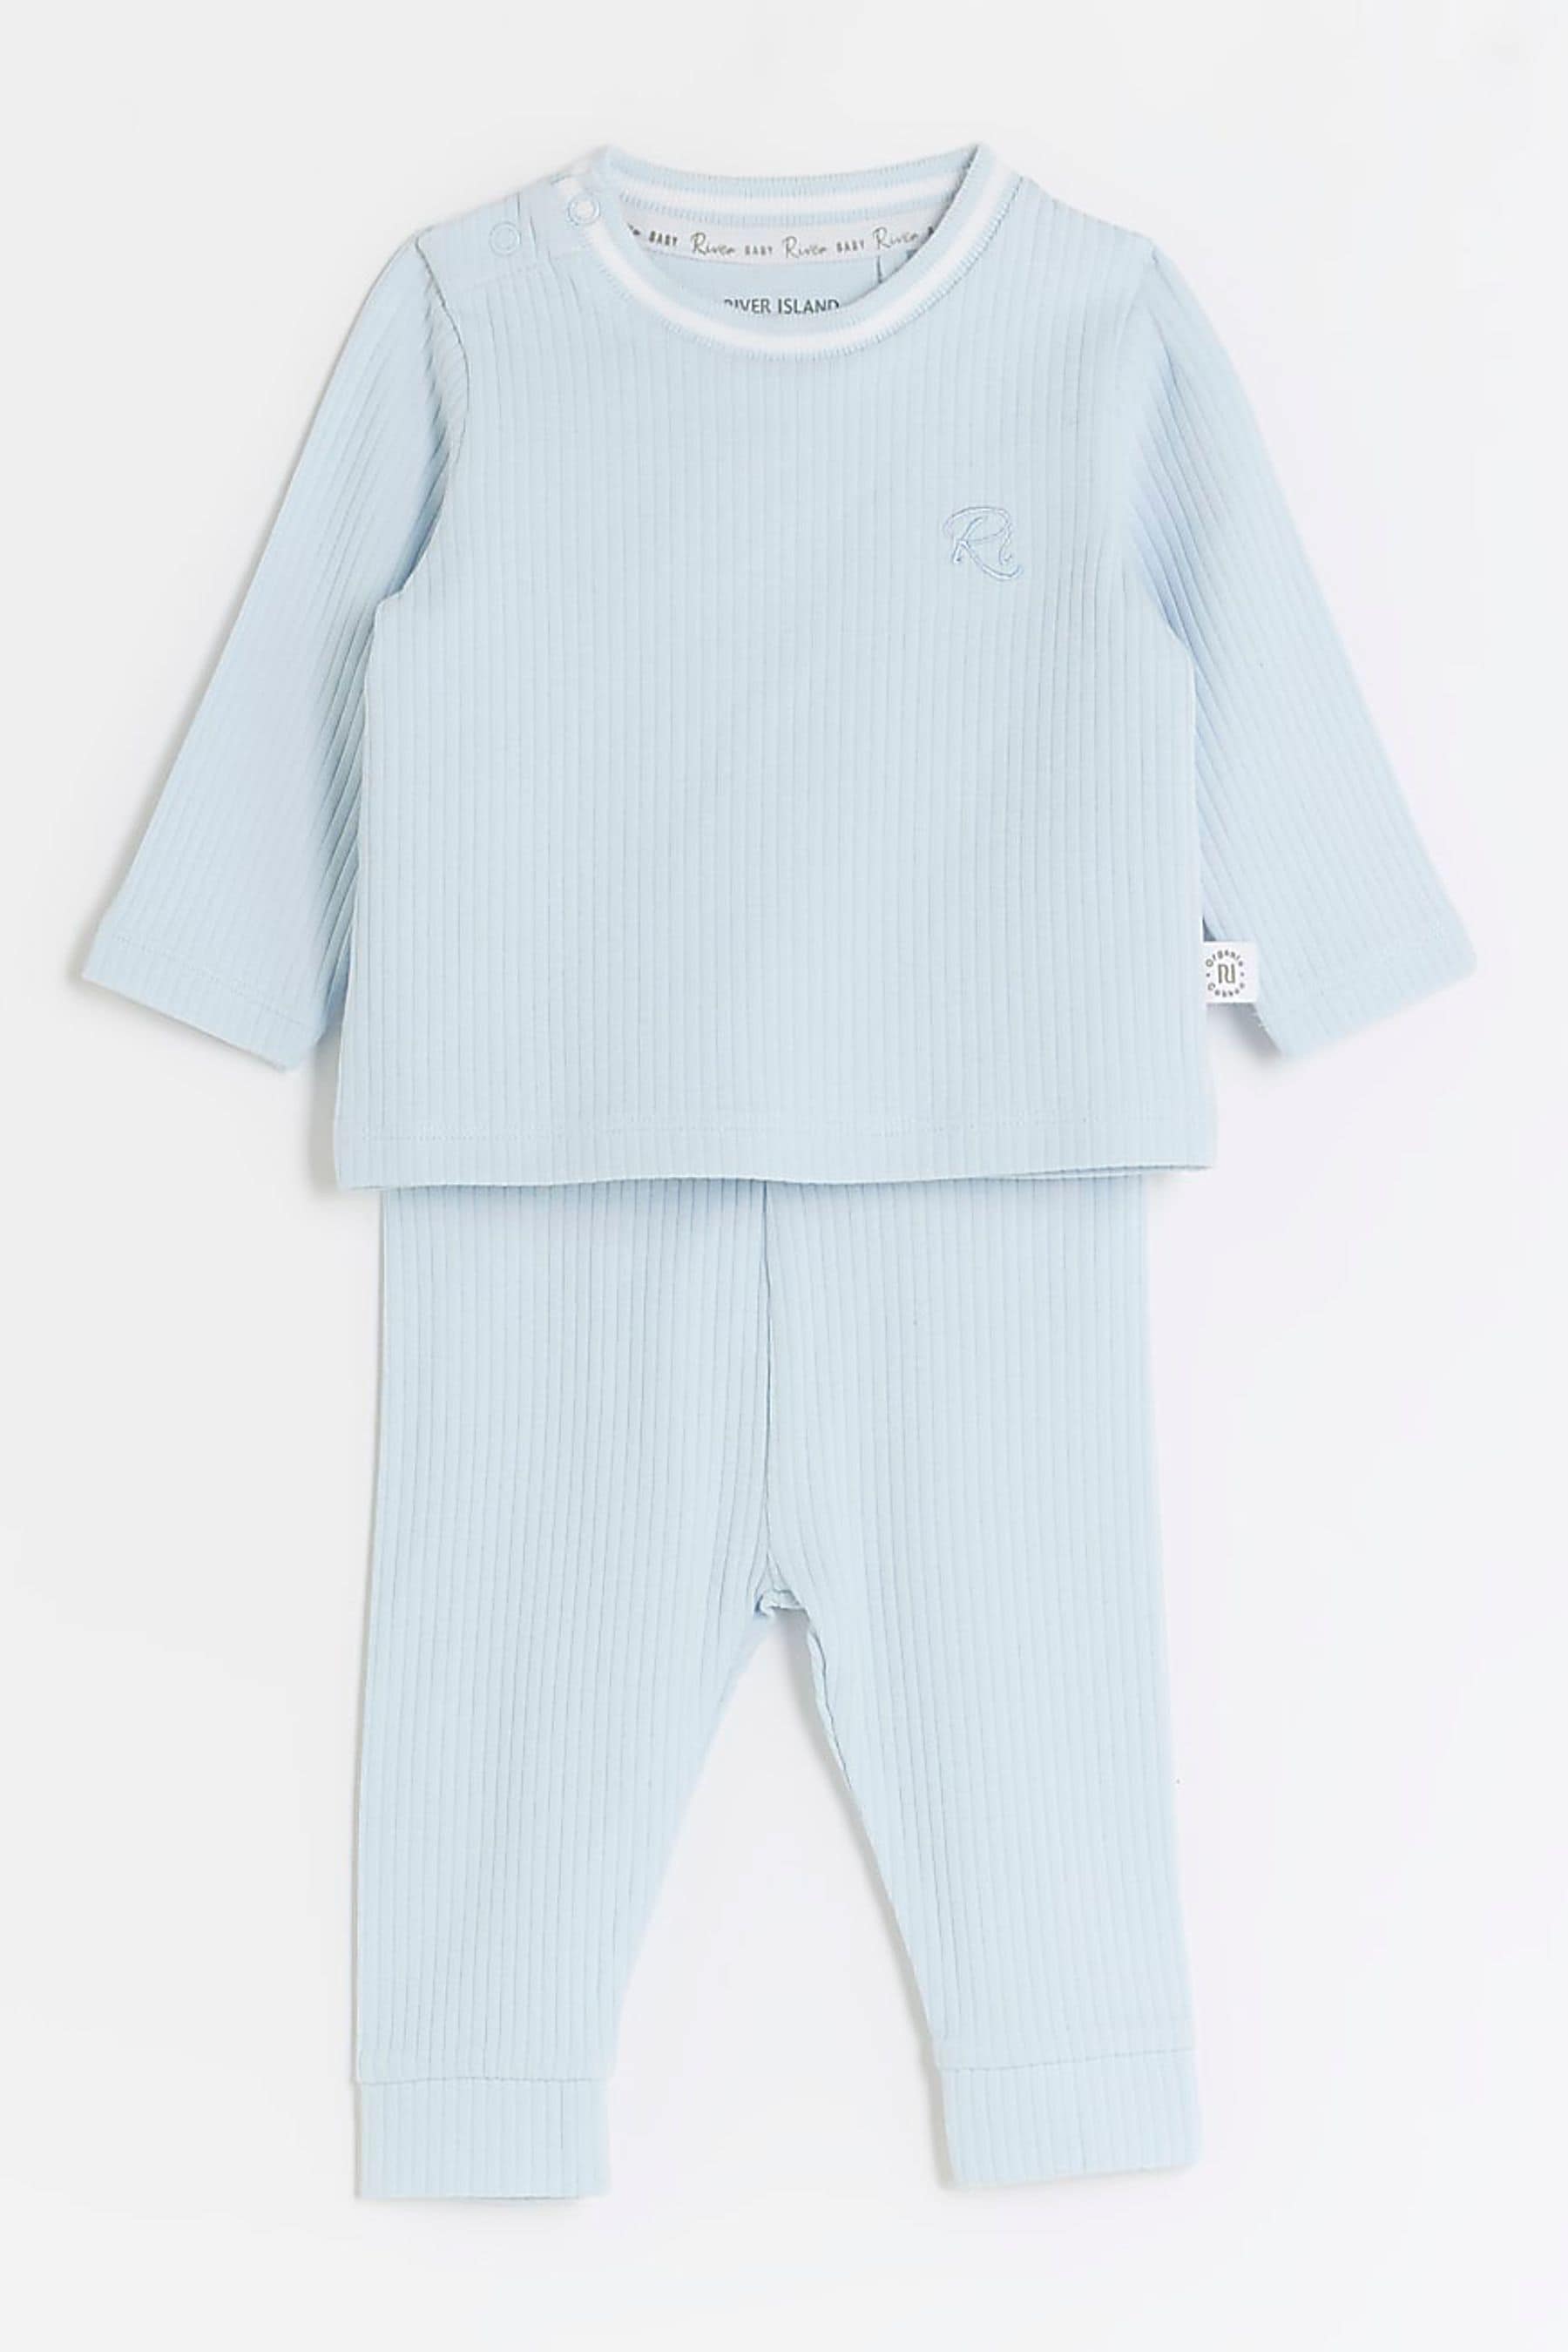 Buy River Island Blue Baby Boys Tipped Rib Set from the Next UK online shop